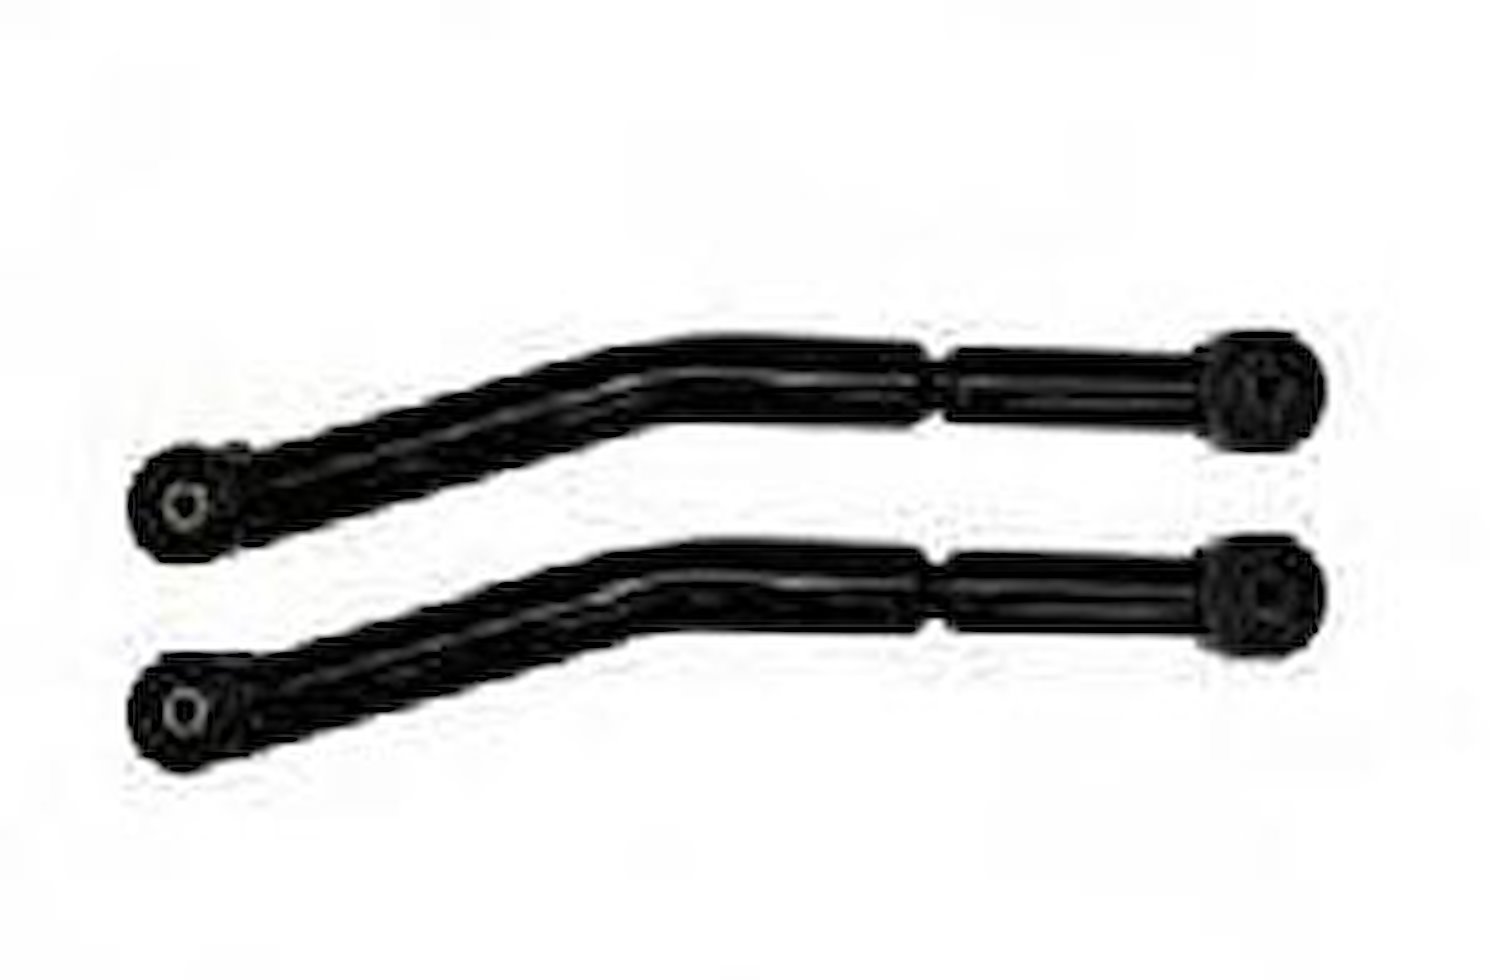 Axle-to-Frame Links - High Articulation 2007-11 Jeep Wrangler JK Fits 2" & 4" Lift Kits